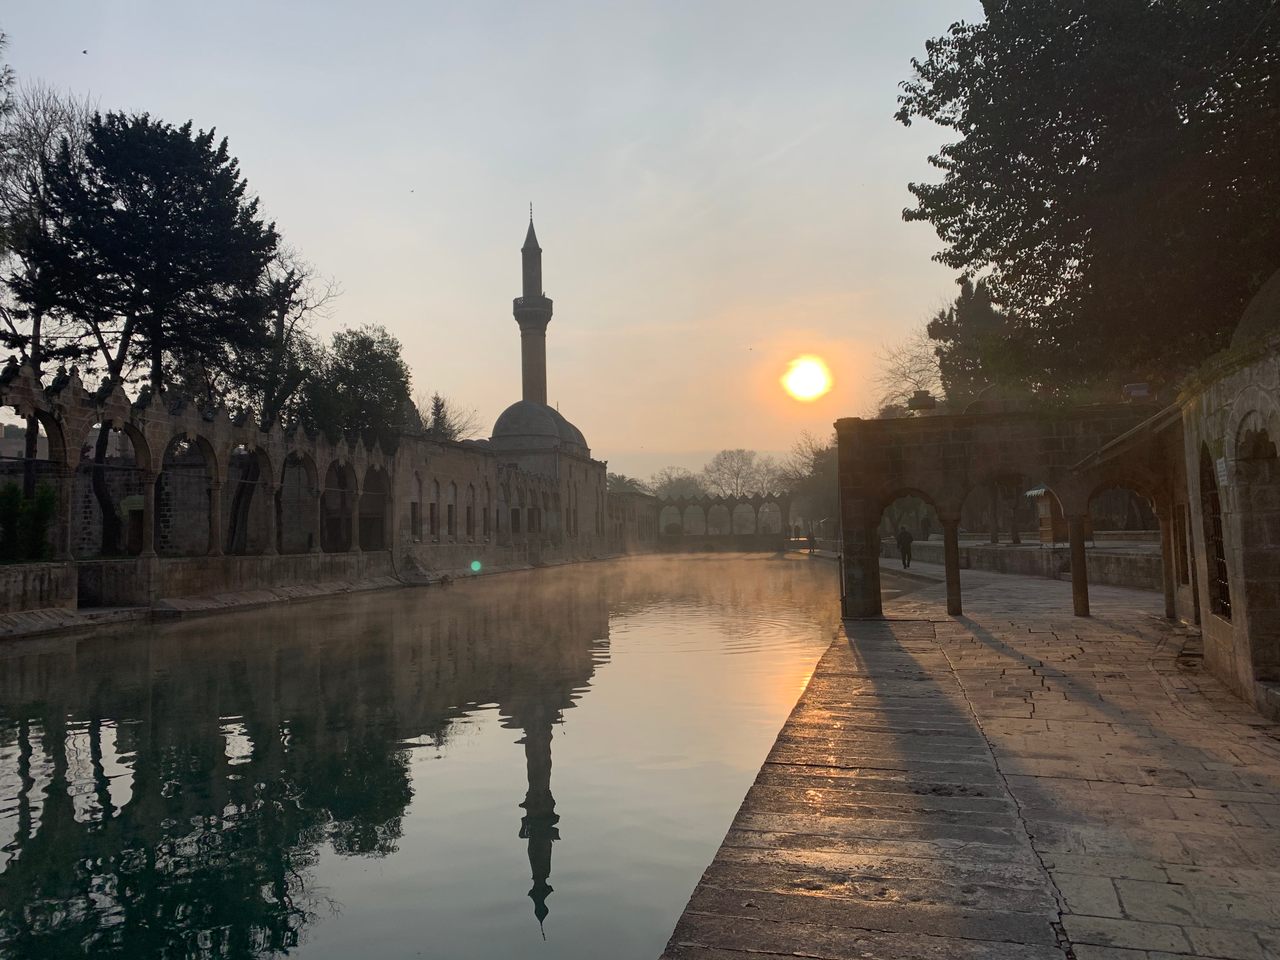 The sun rises over the Pool of Abraham in the former Crusader city of Edessa (modern-day Urfa, Turkey), where Jerusalem's first queen, Arda of Armenia, as well as her successor, Melisende of Jerusalem, were both born almost a thousand years ago.